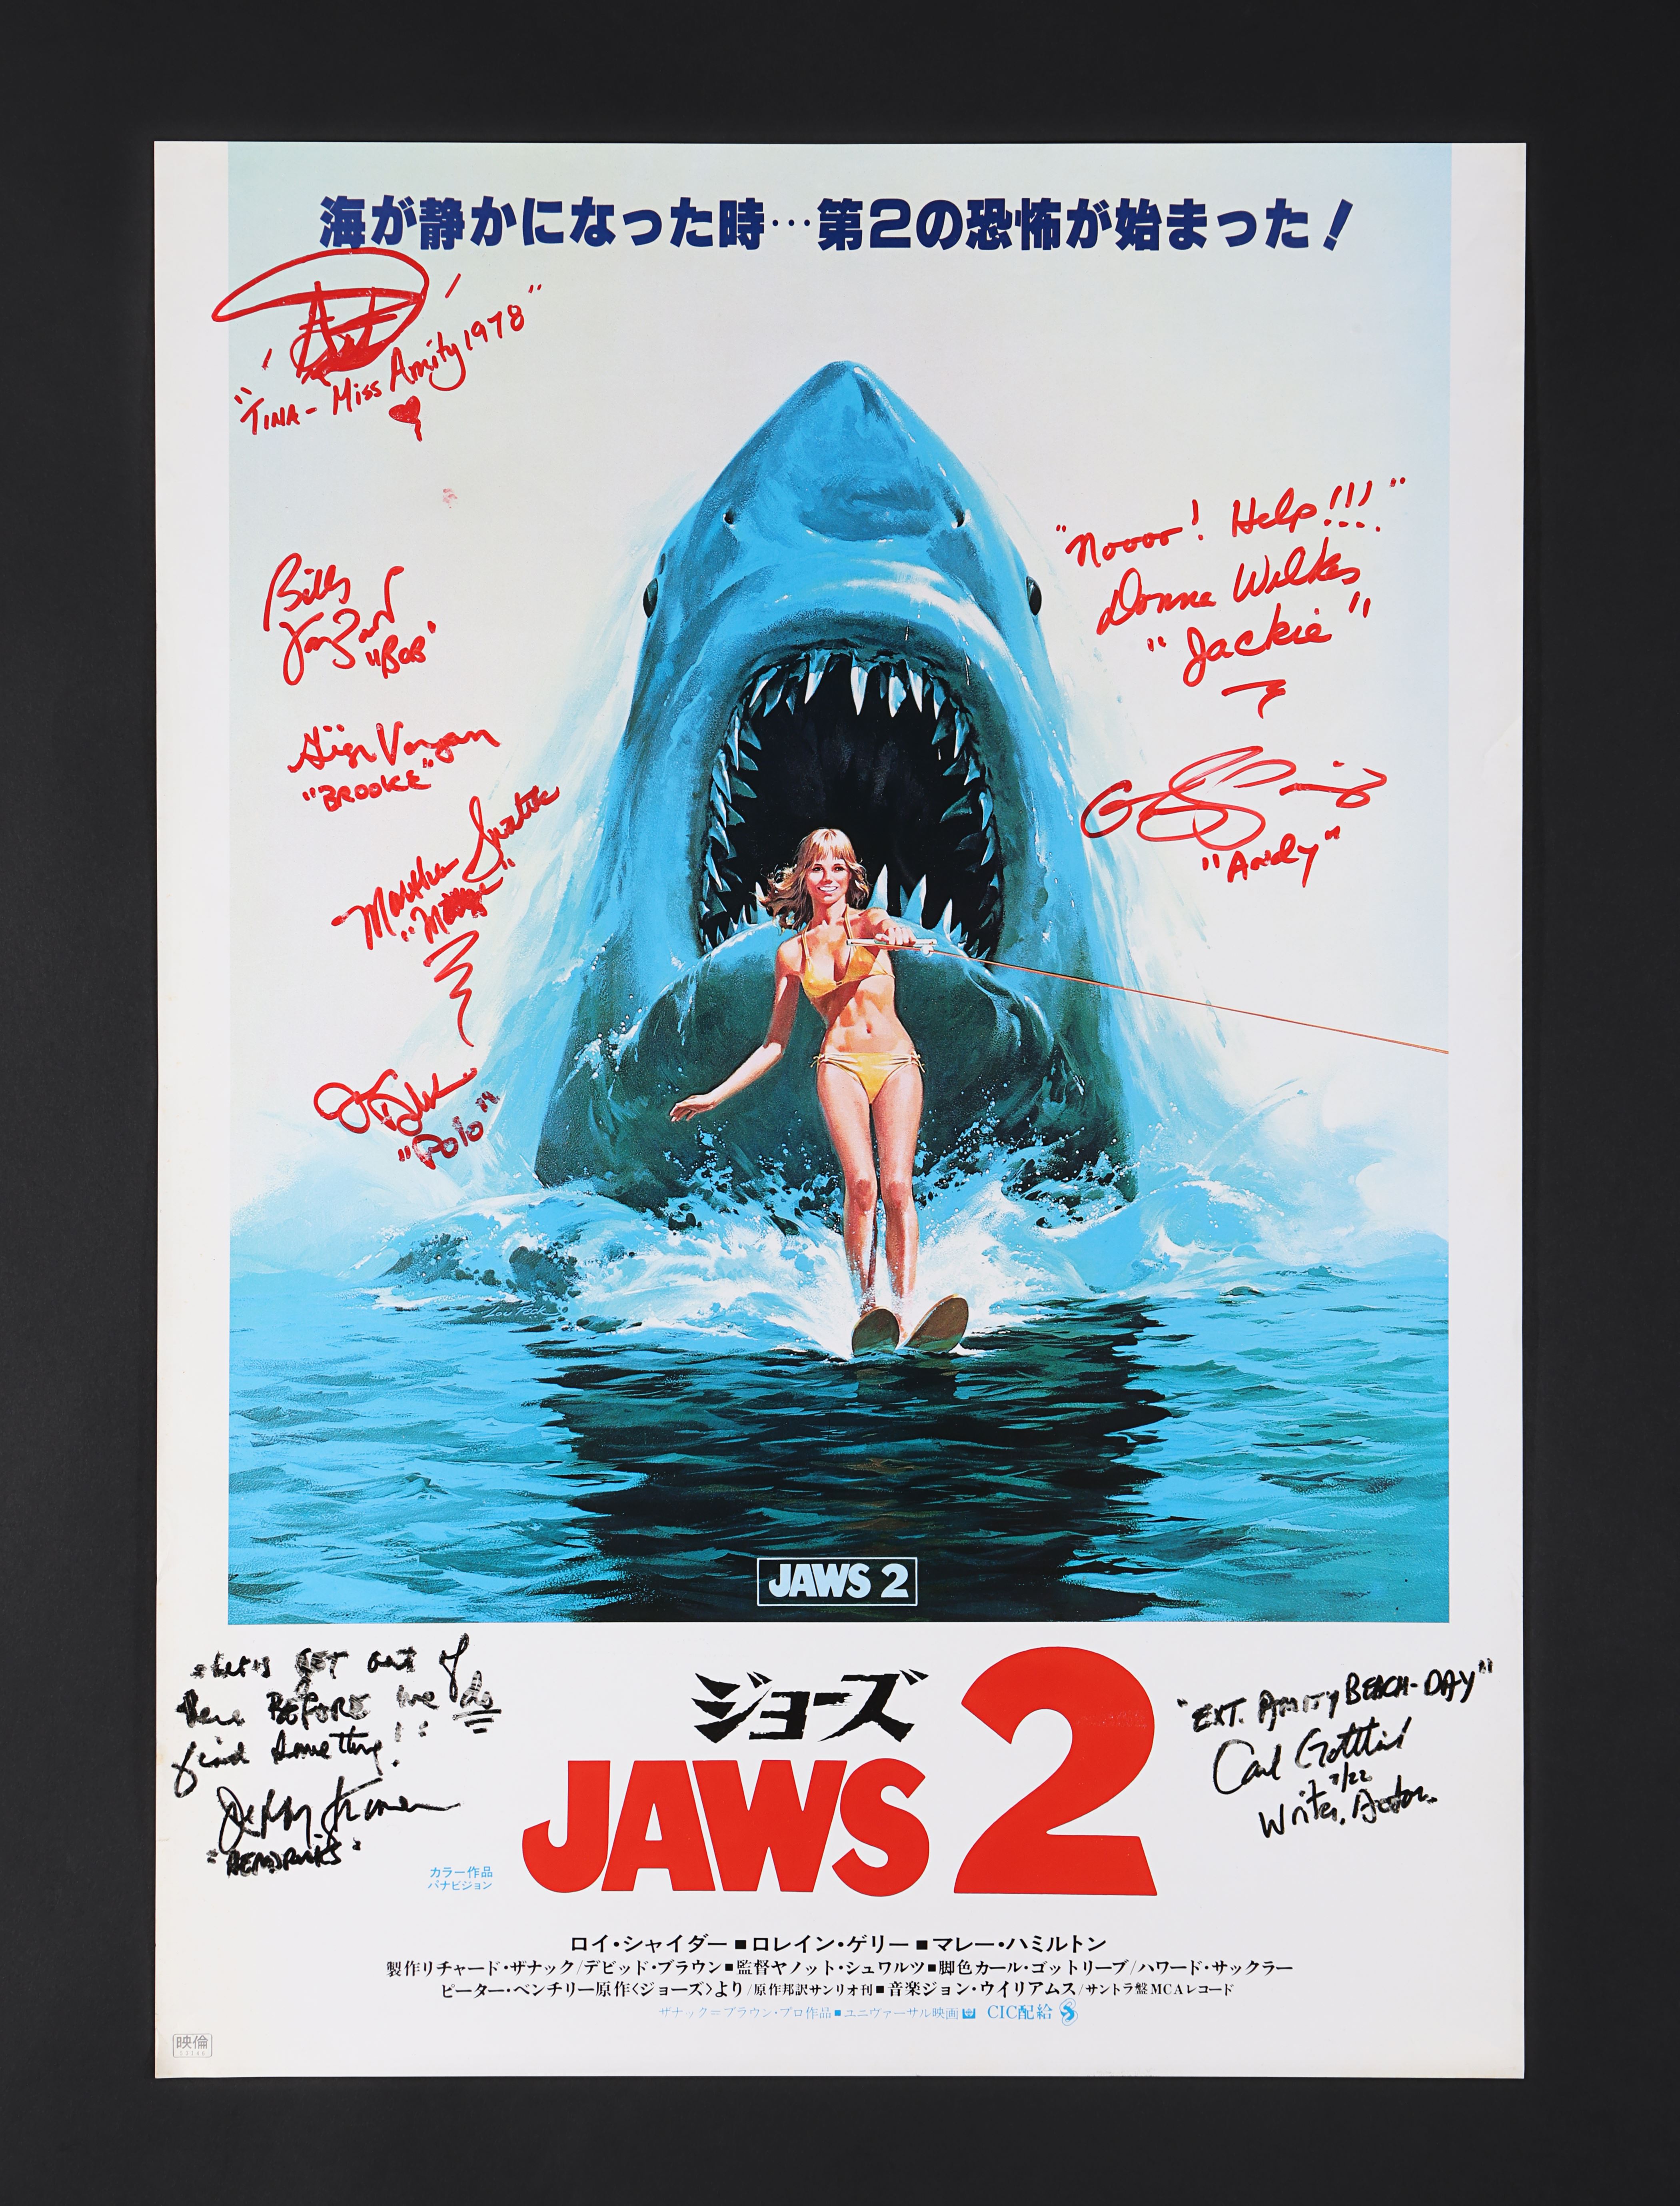 JAWS 2 (1978) - Carl Gottlieb, Jeffrey Kramer, Ann Dusenberry and Others Autographed Japanese B2, 19